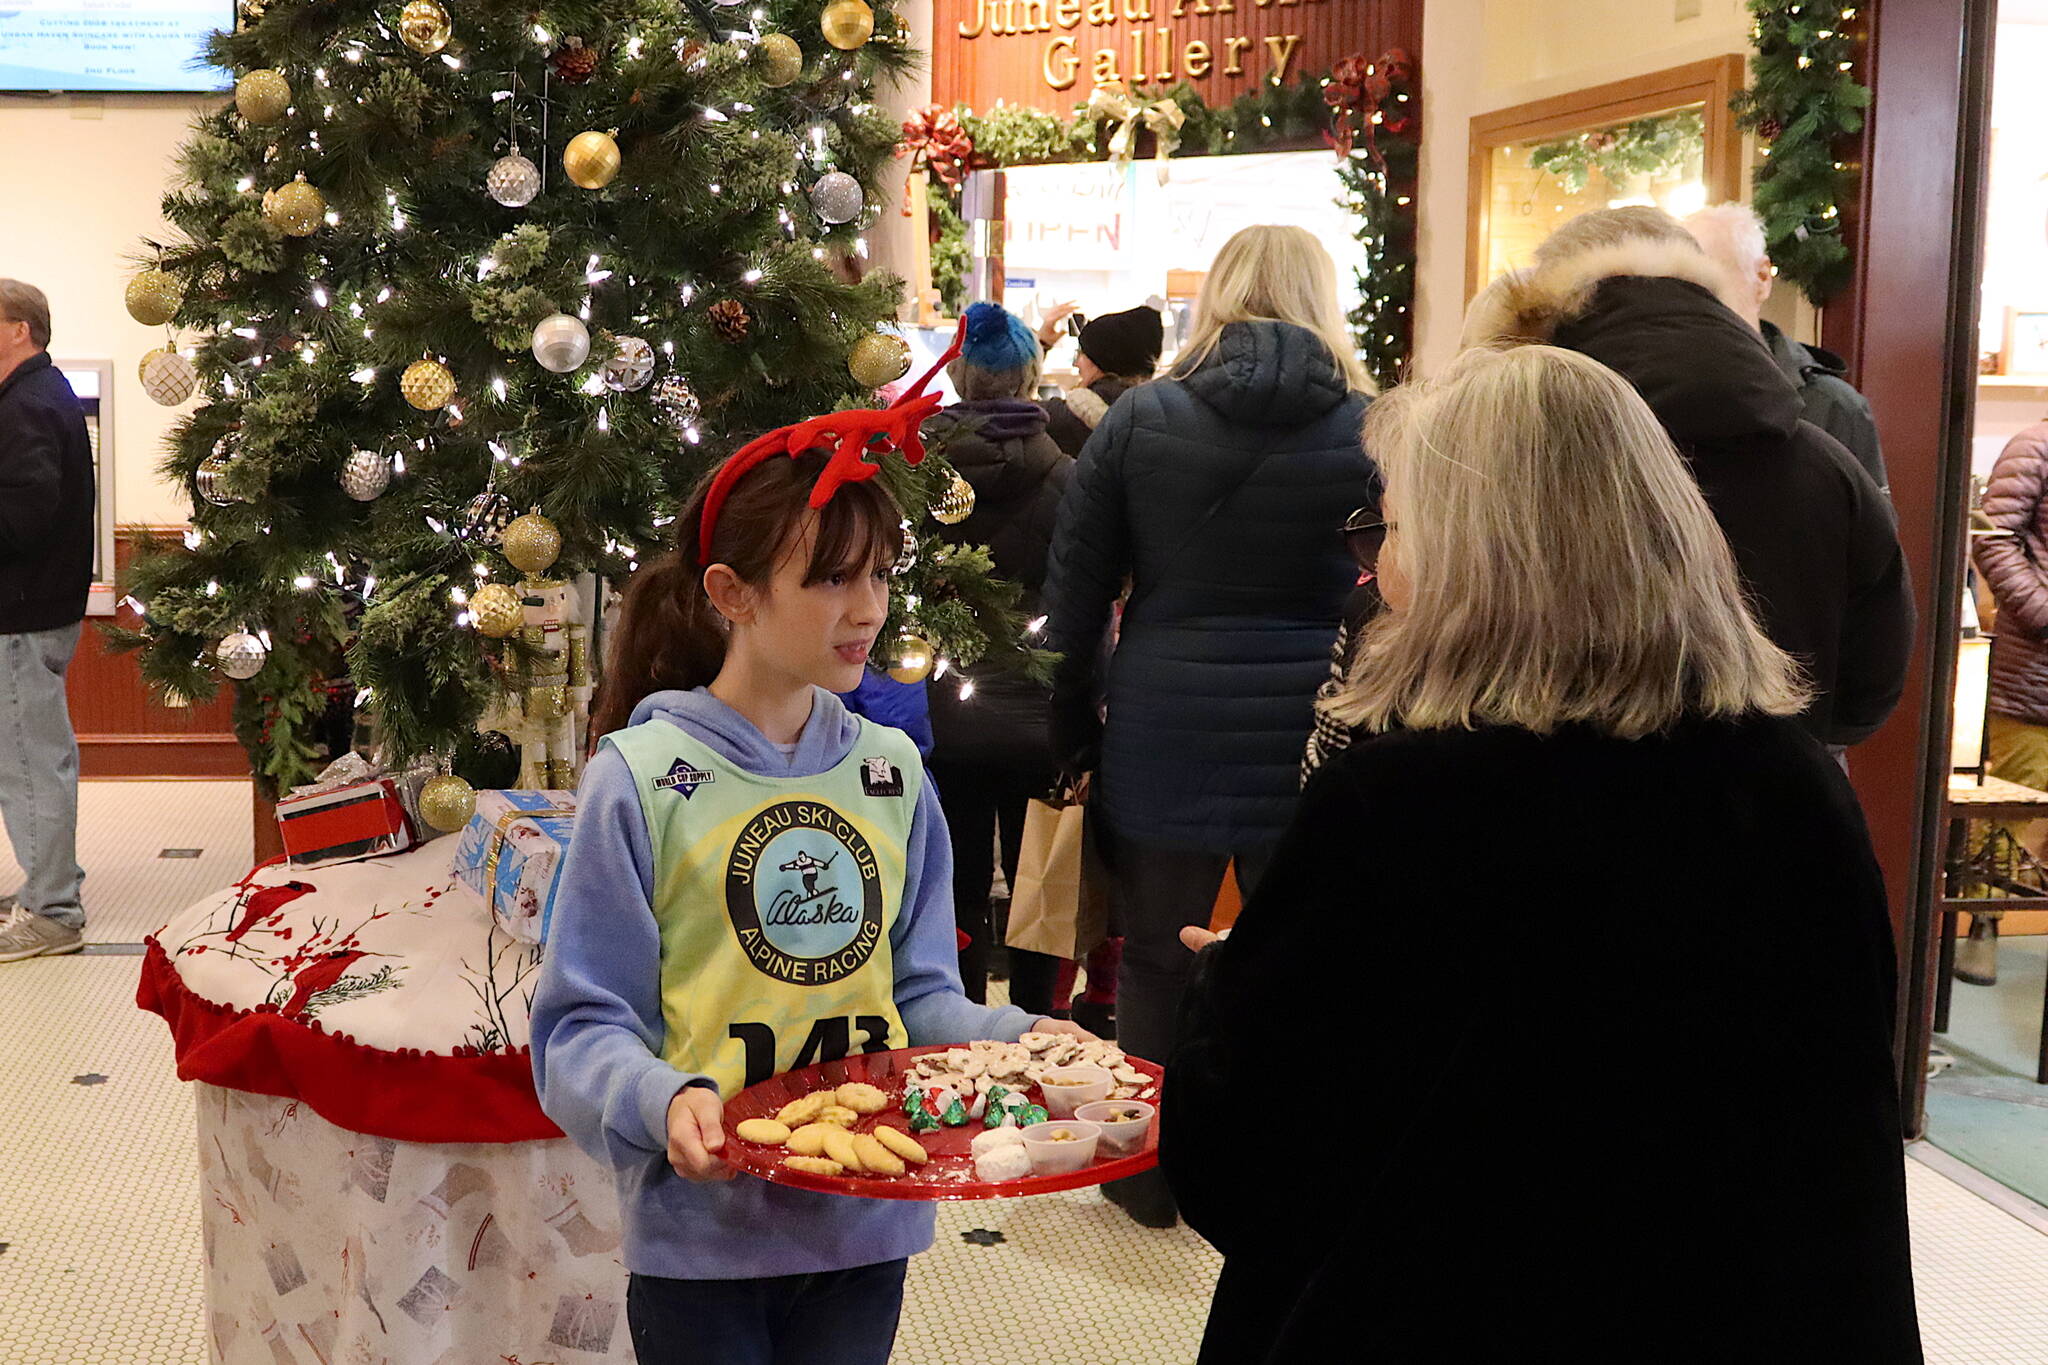 Audrey Burke, 10, offers cookies to people visiting shops at the Senate Building during Gallery Walk on Friday night. (Mark Sabbatini / Juneau Empire)